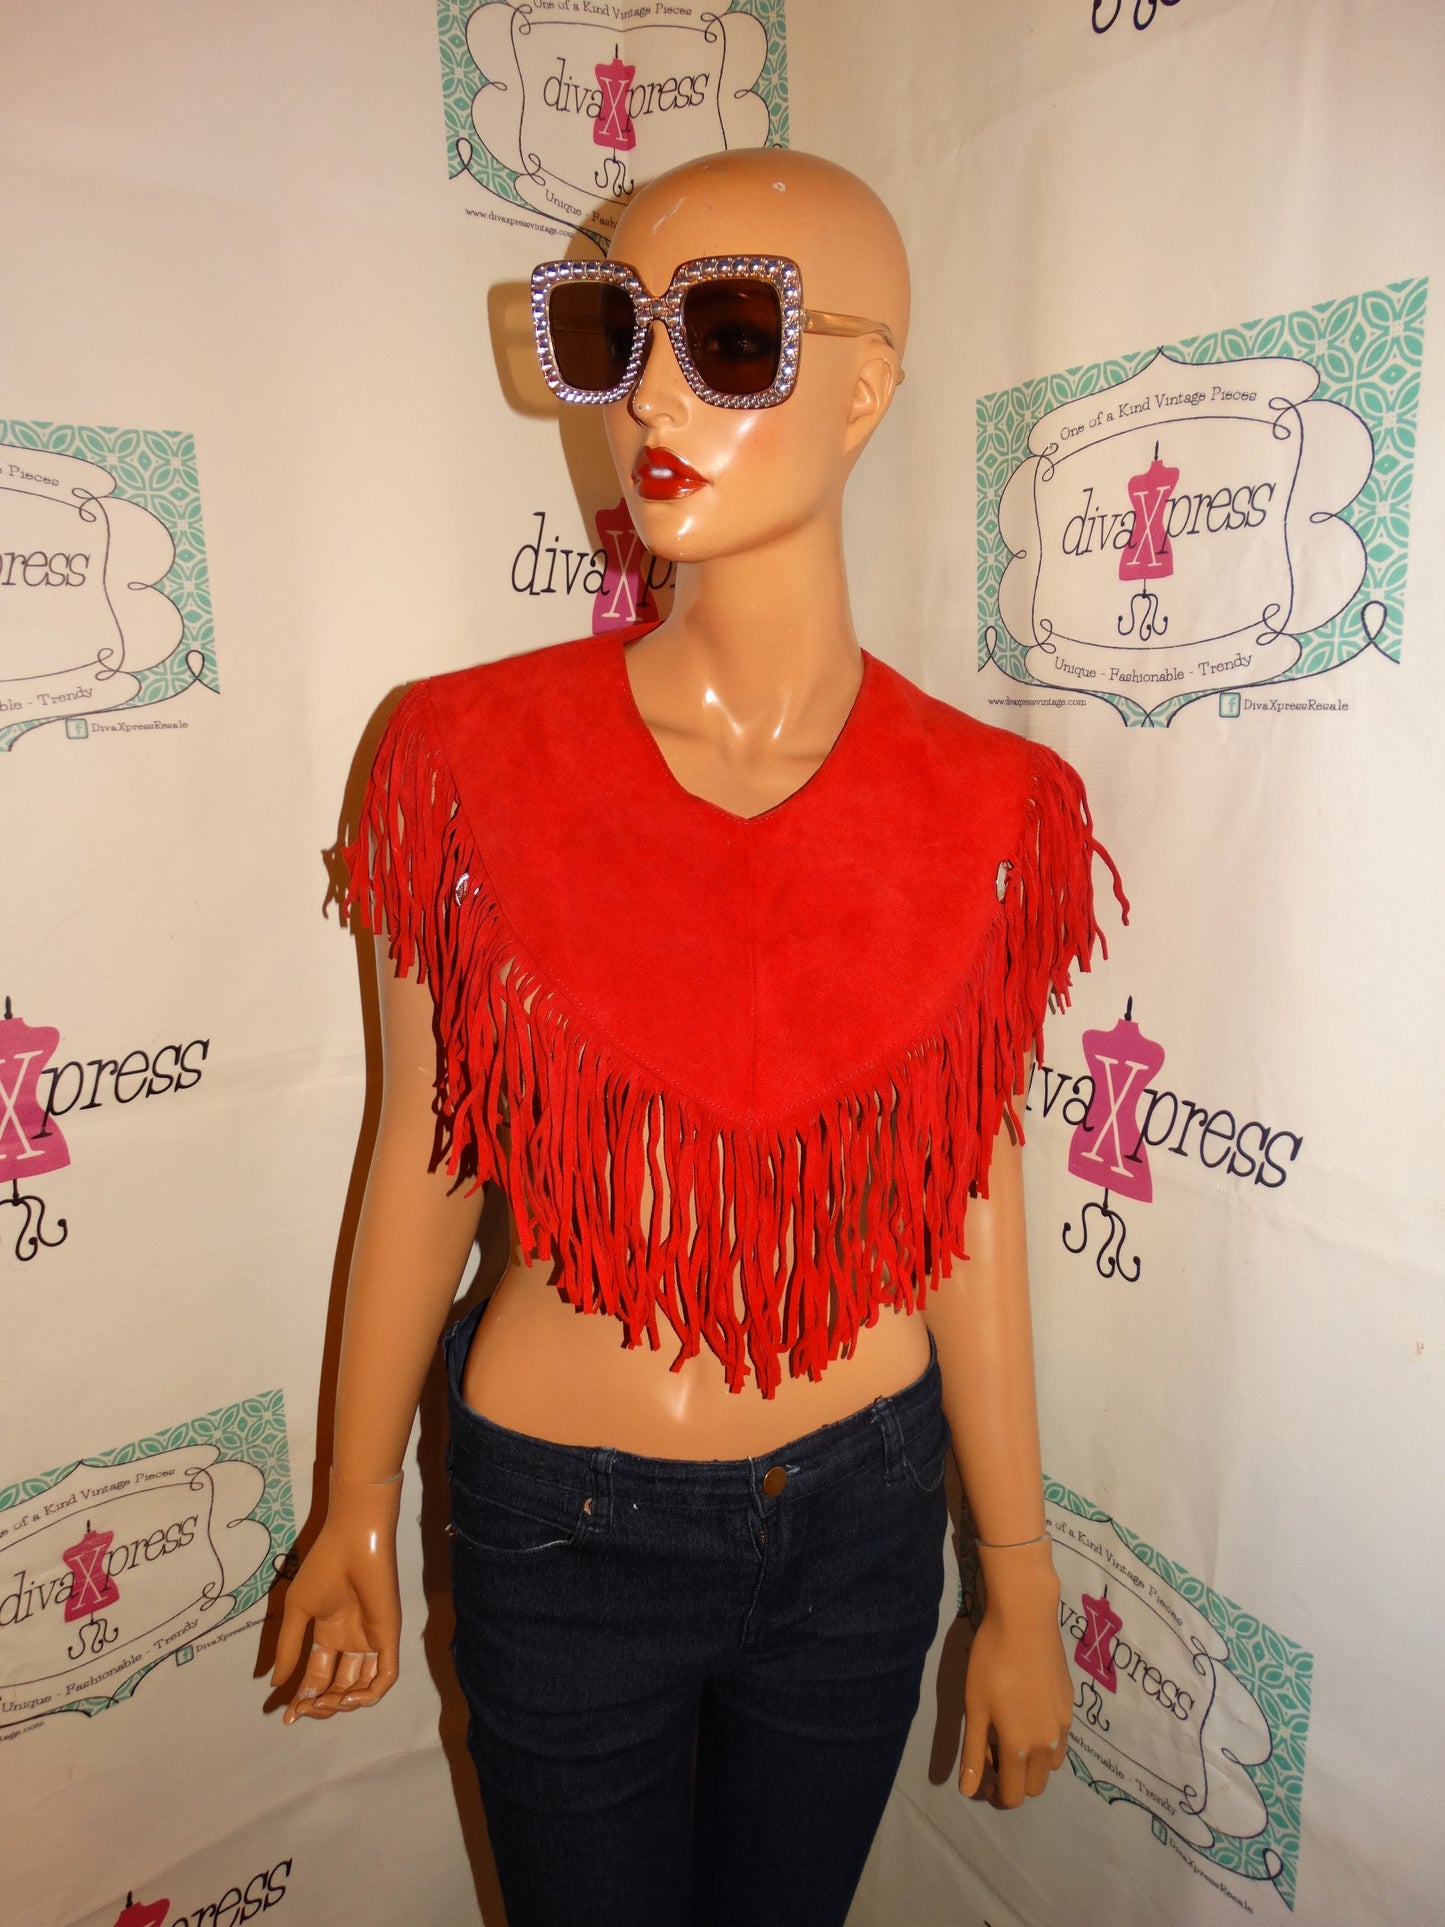 Vintage Red Suede Shingle Short Poncho Size S